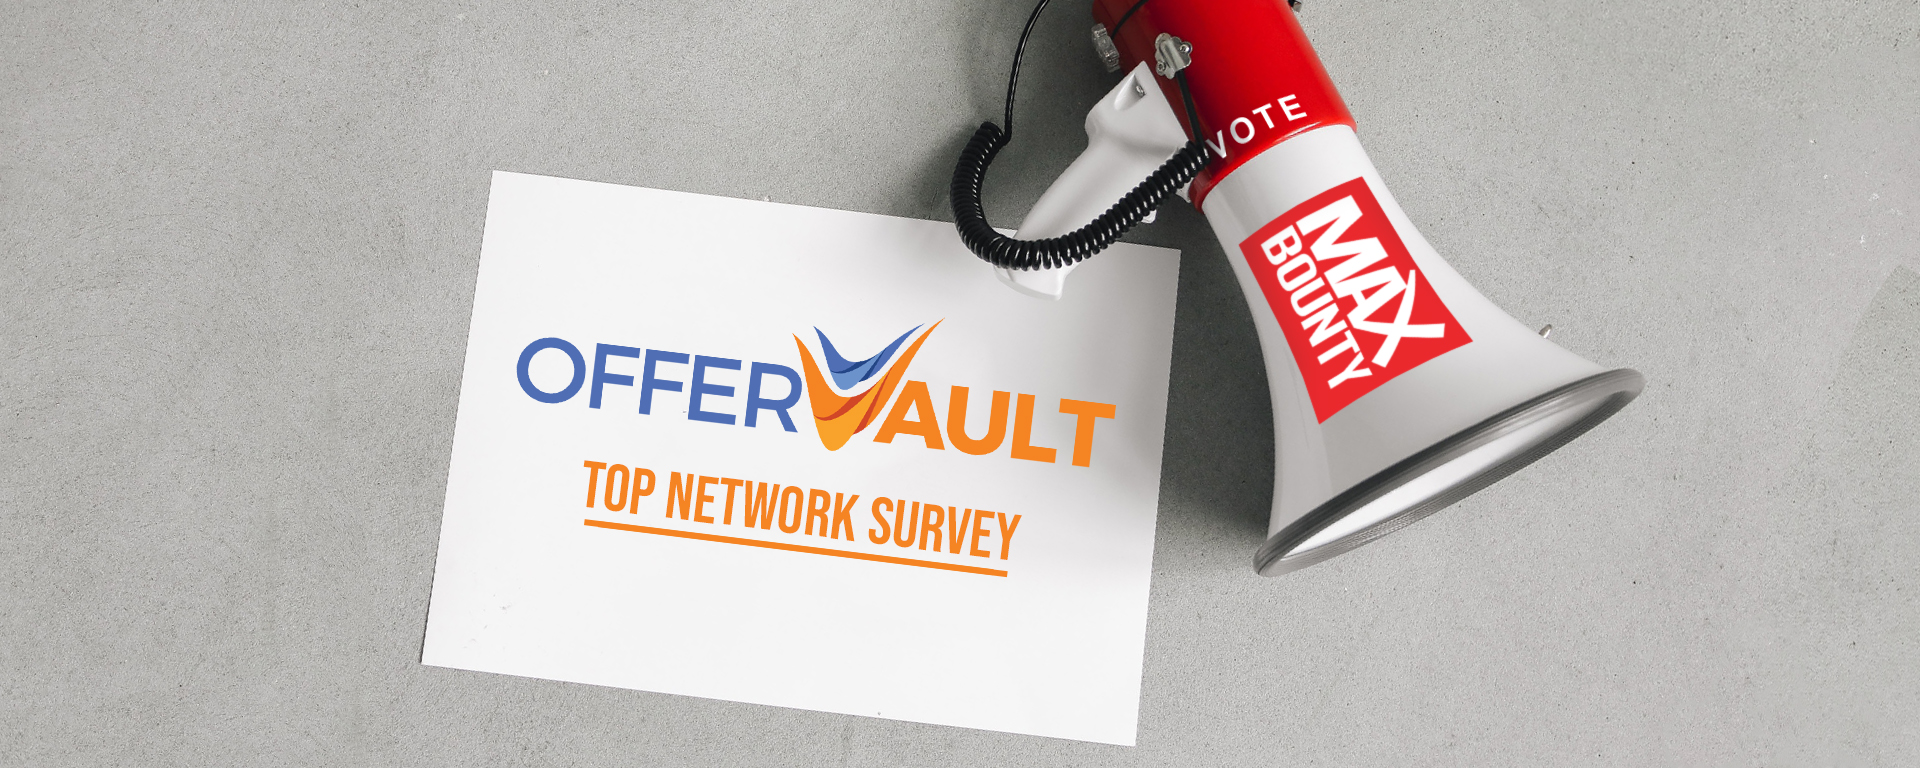 Use Your Voice to Vote MaxBounty as OfferVault's #1 Network